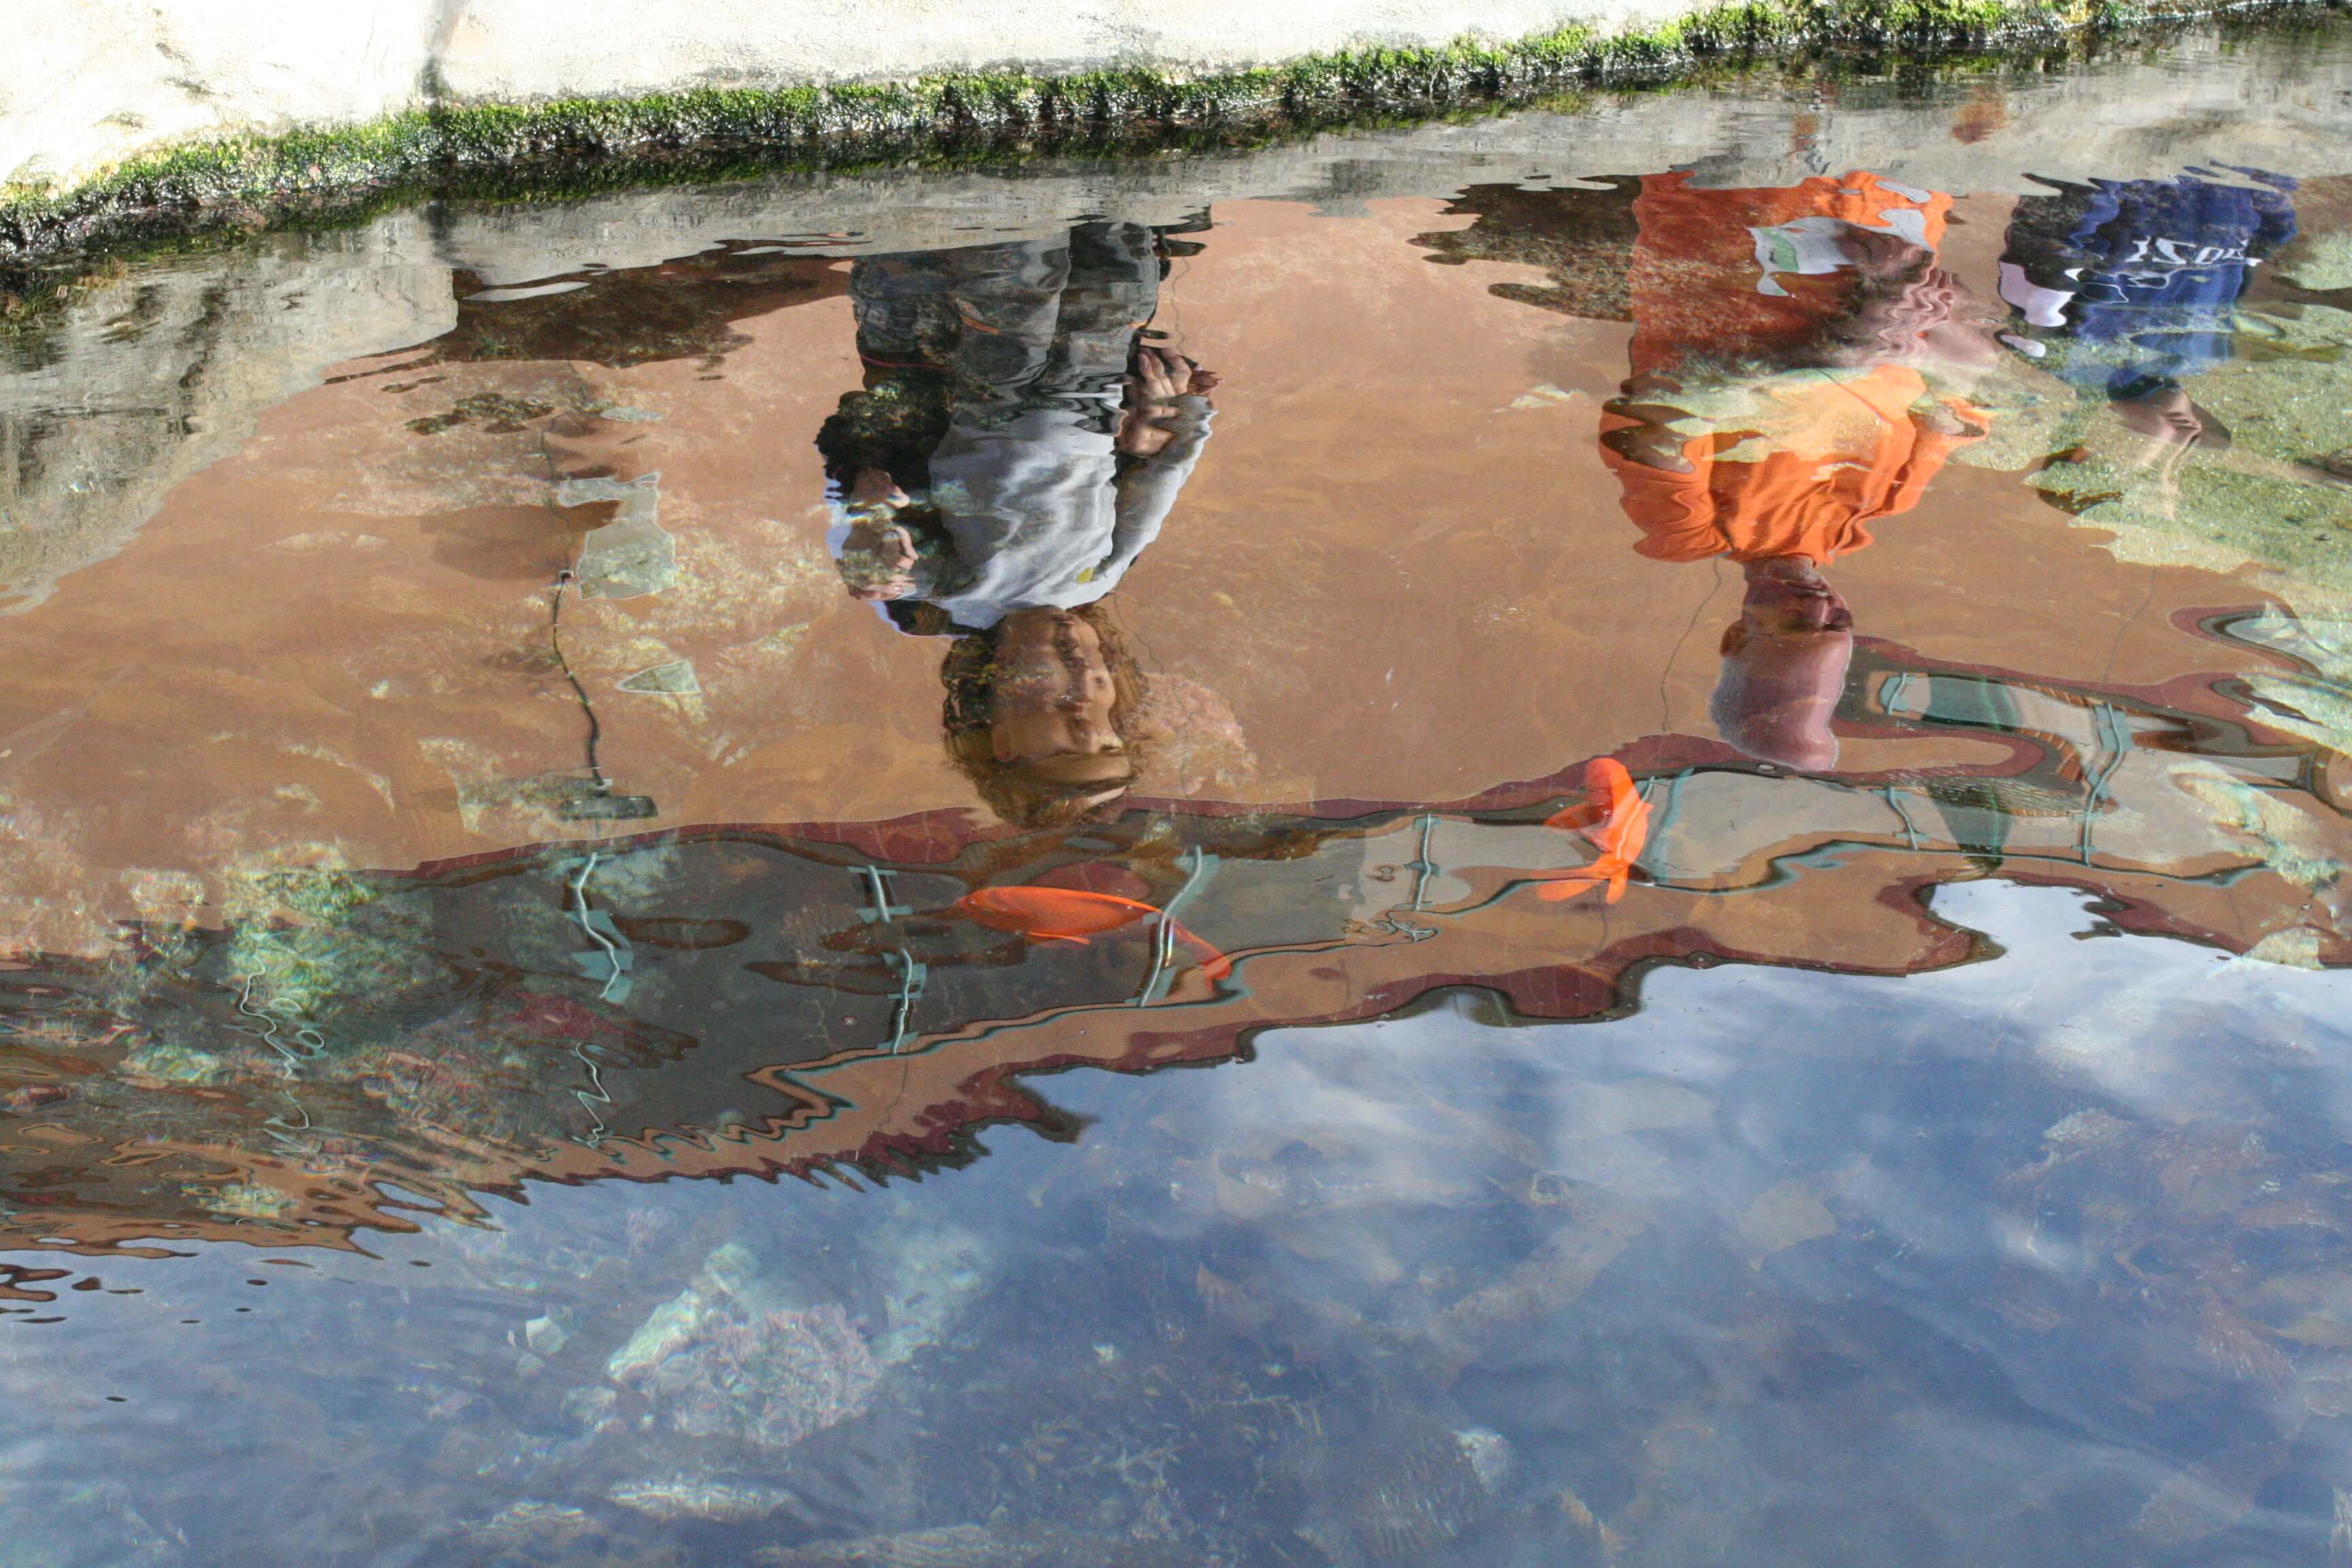 Koi fish in a reflecting pond